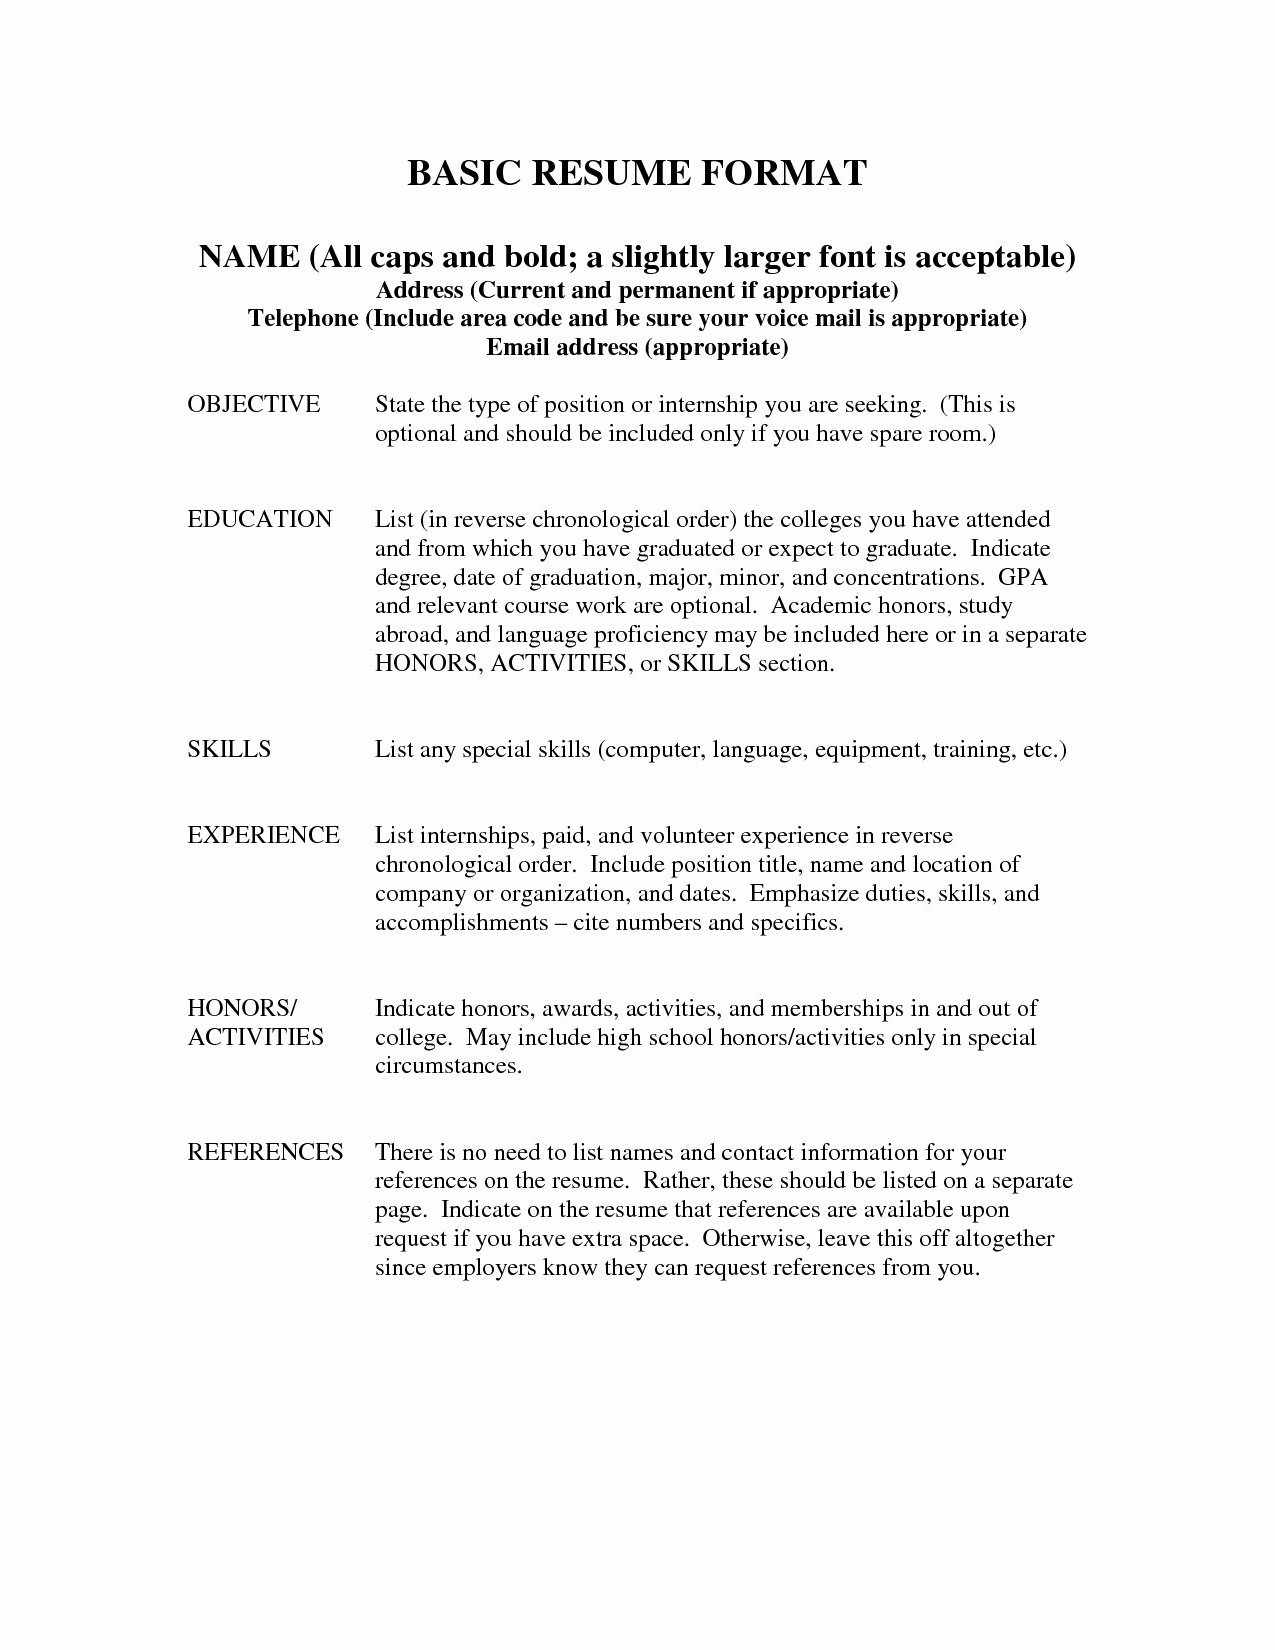 Proper Way to List References Resume Resume Ideas